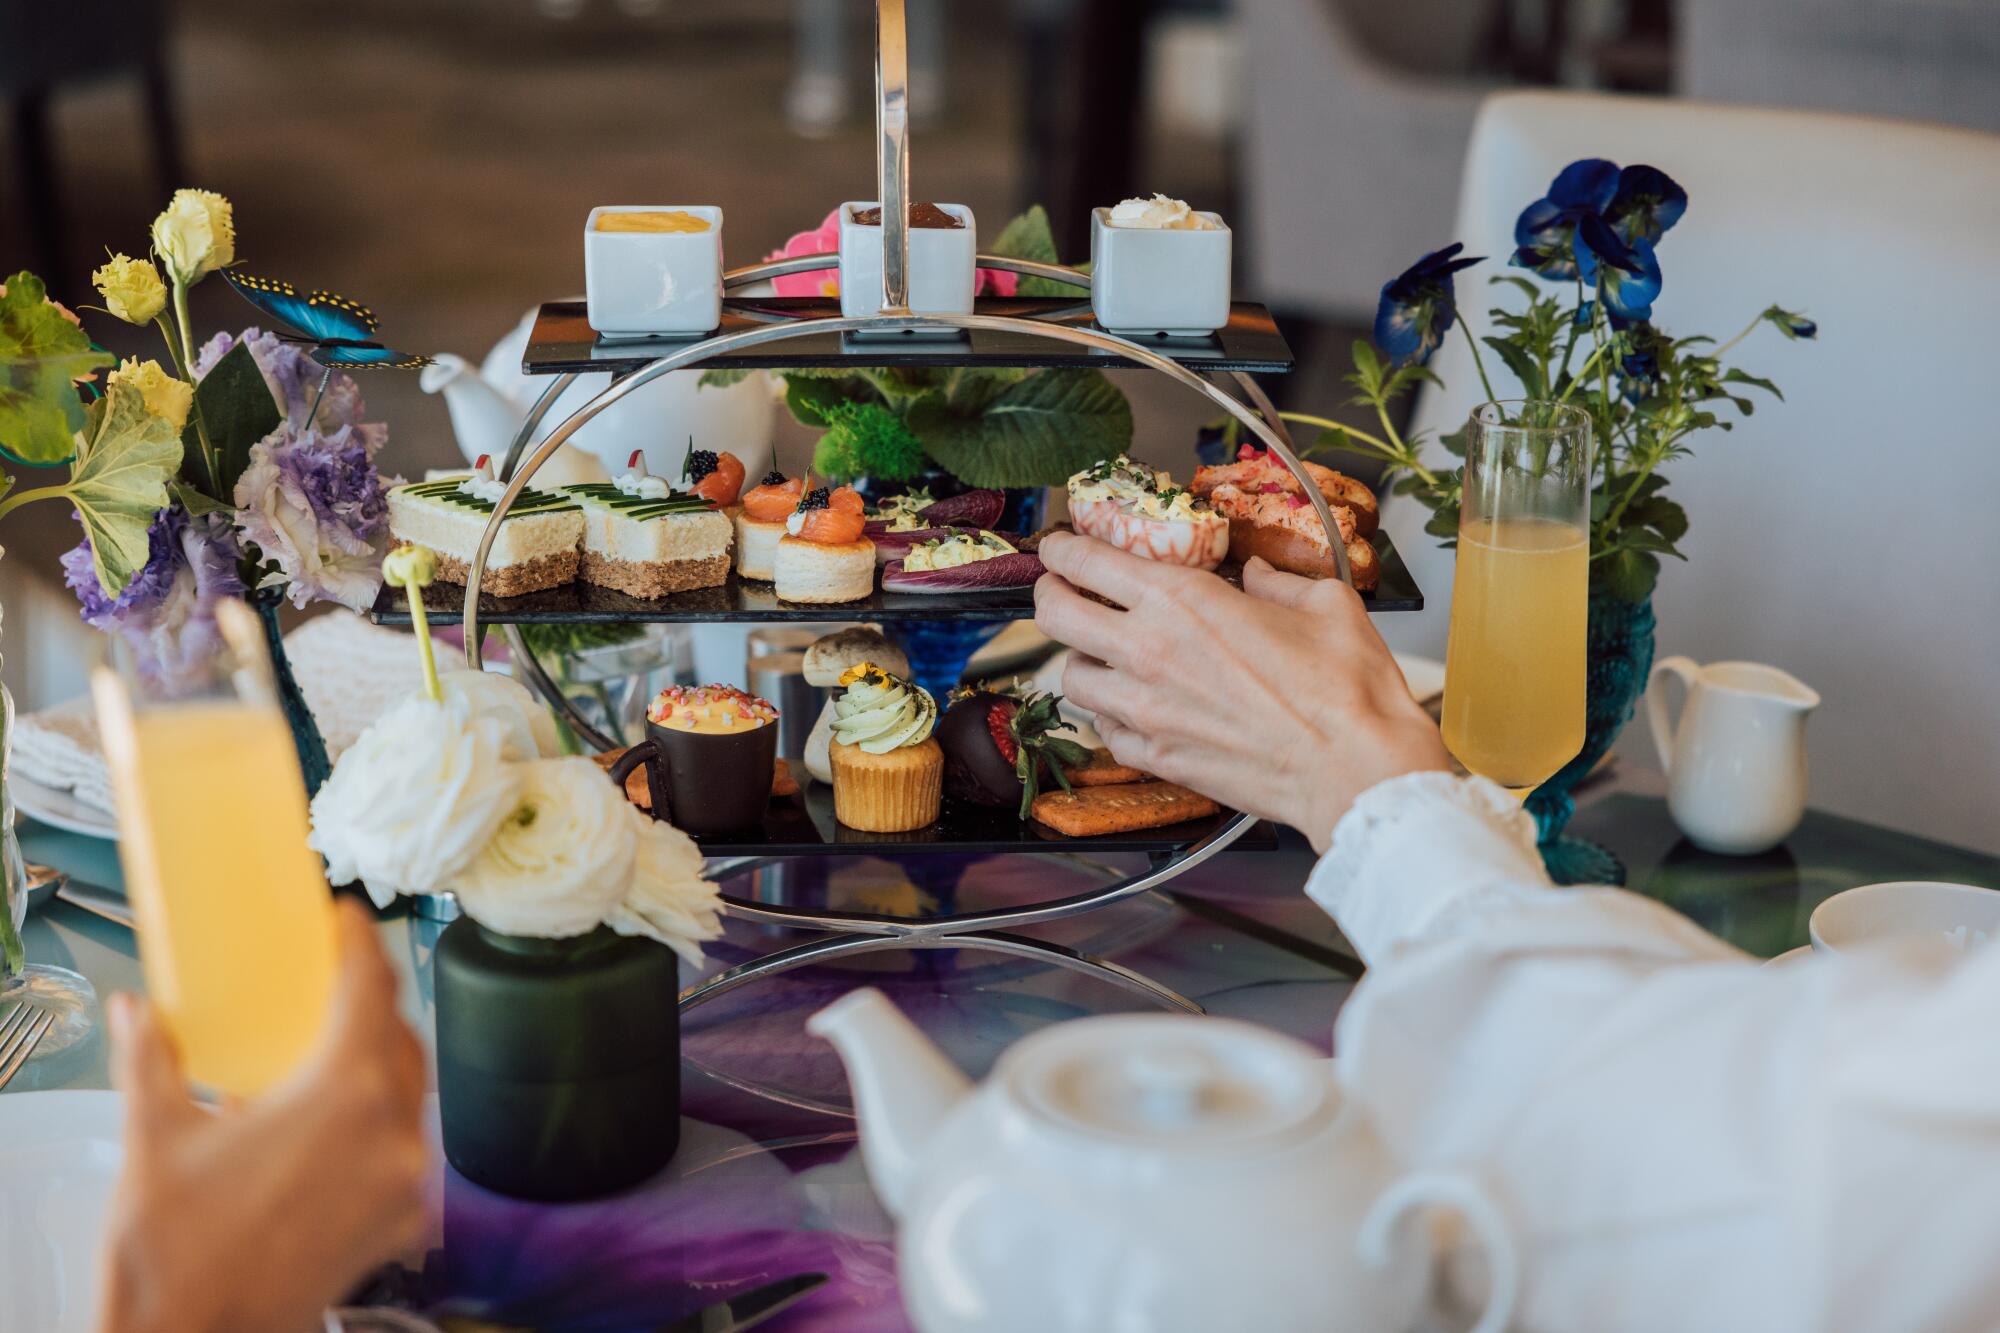 Afternoon tea service at the Ritz-Carlton, Laguna Niguel includes a menu of tea sandwiches and sweets.